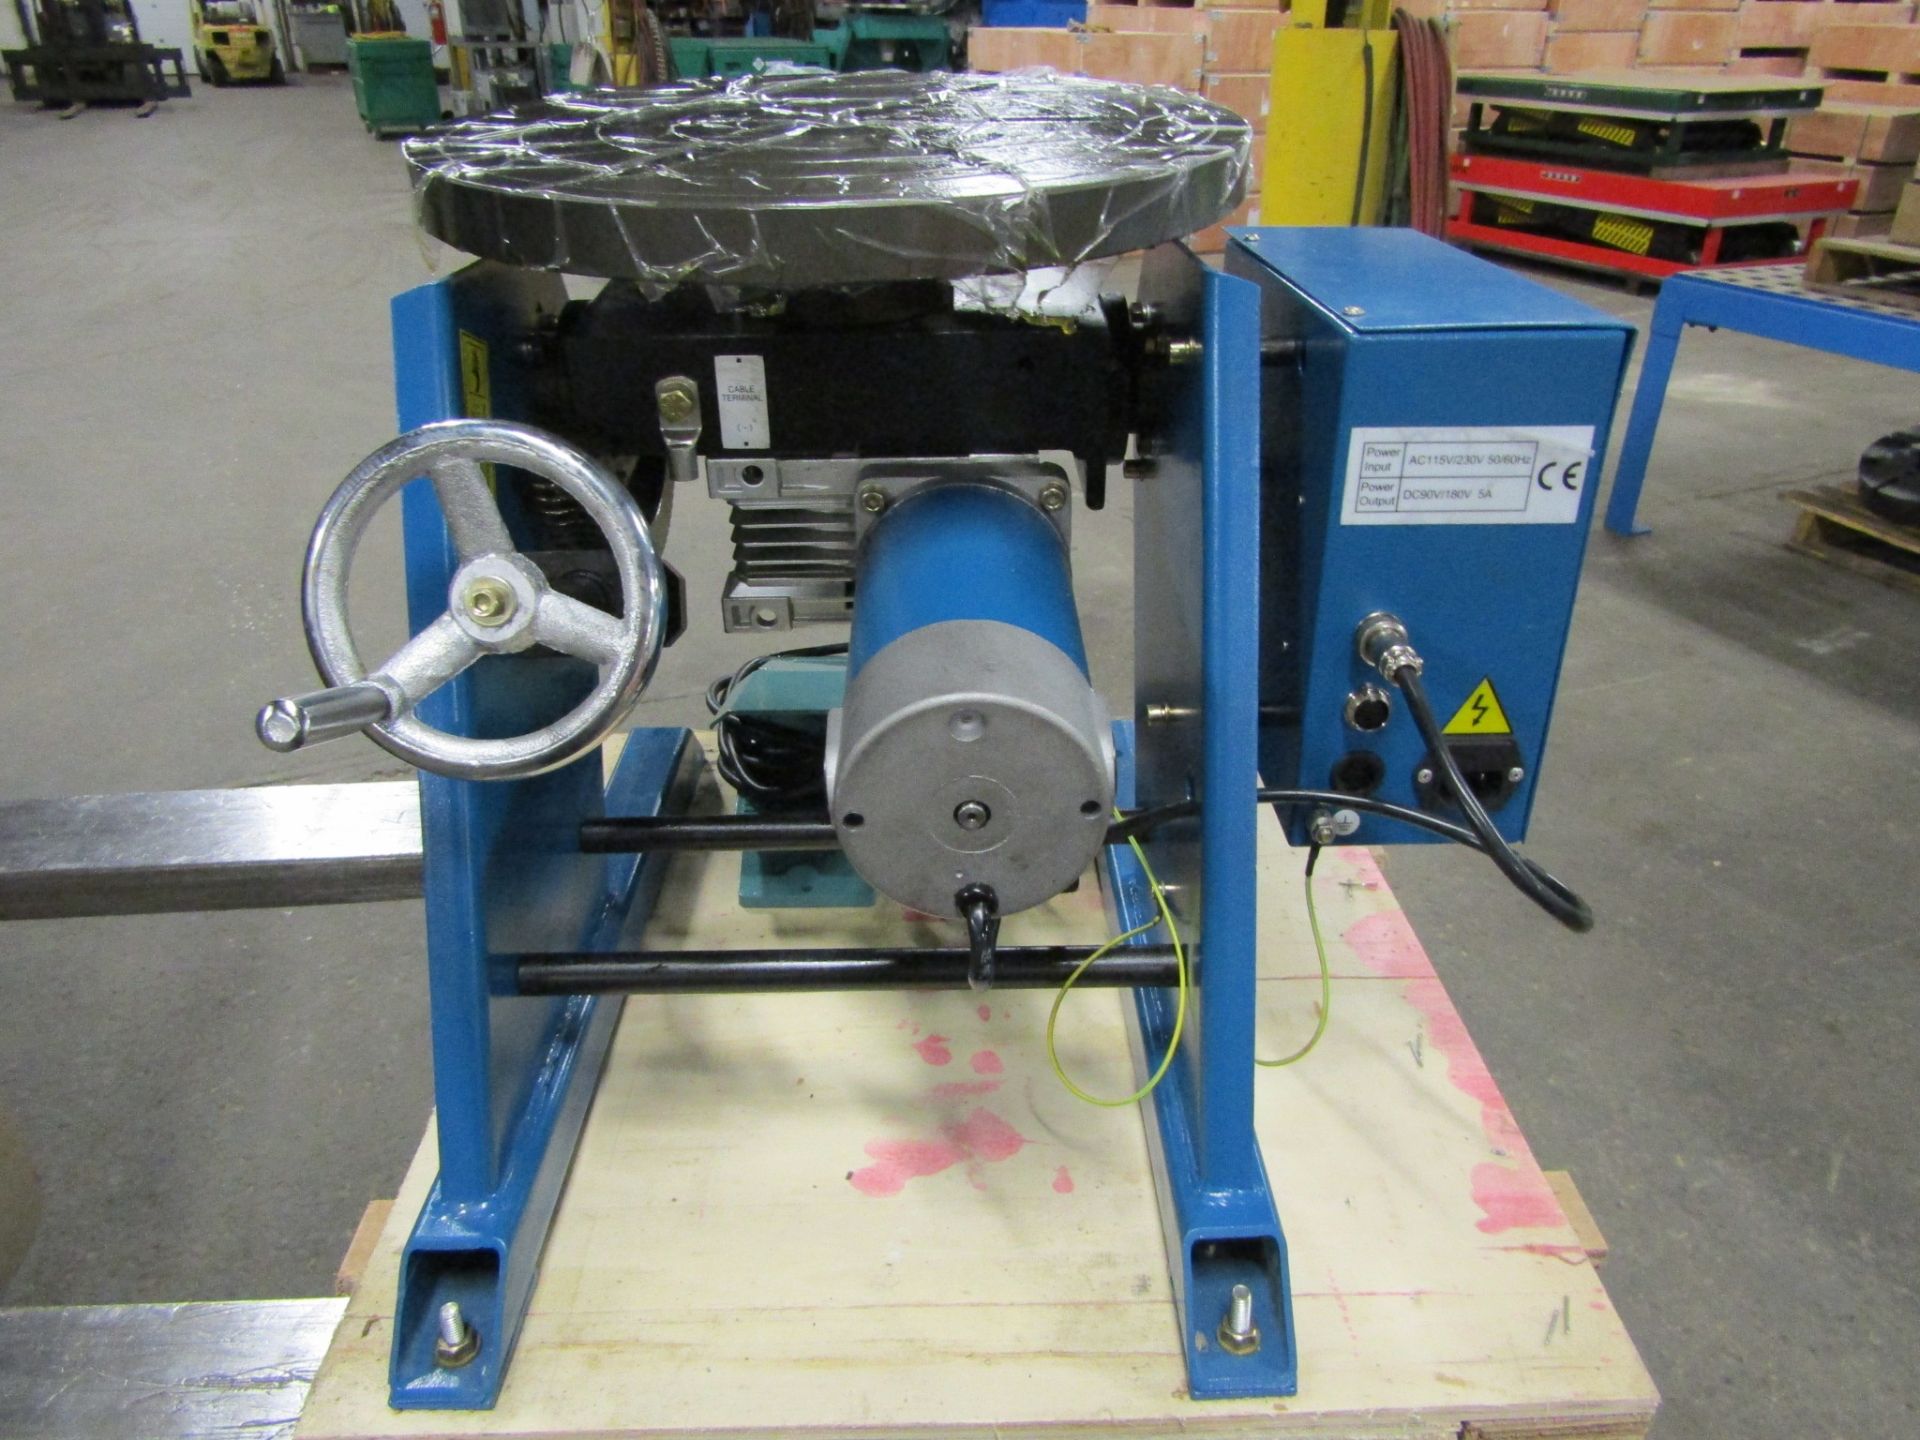 Verner model VD-300 WELDING POSITIONER 300lbs capacity - tilt and rotate with variable speed drive - Image 2 of 2